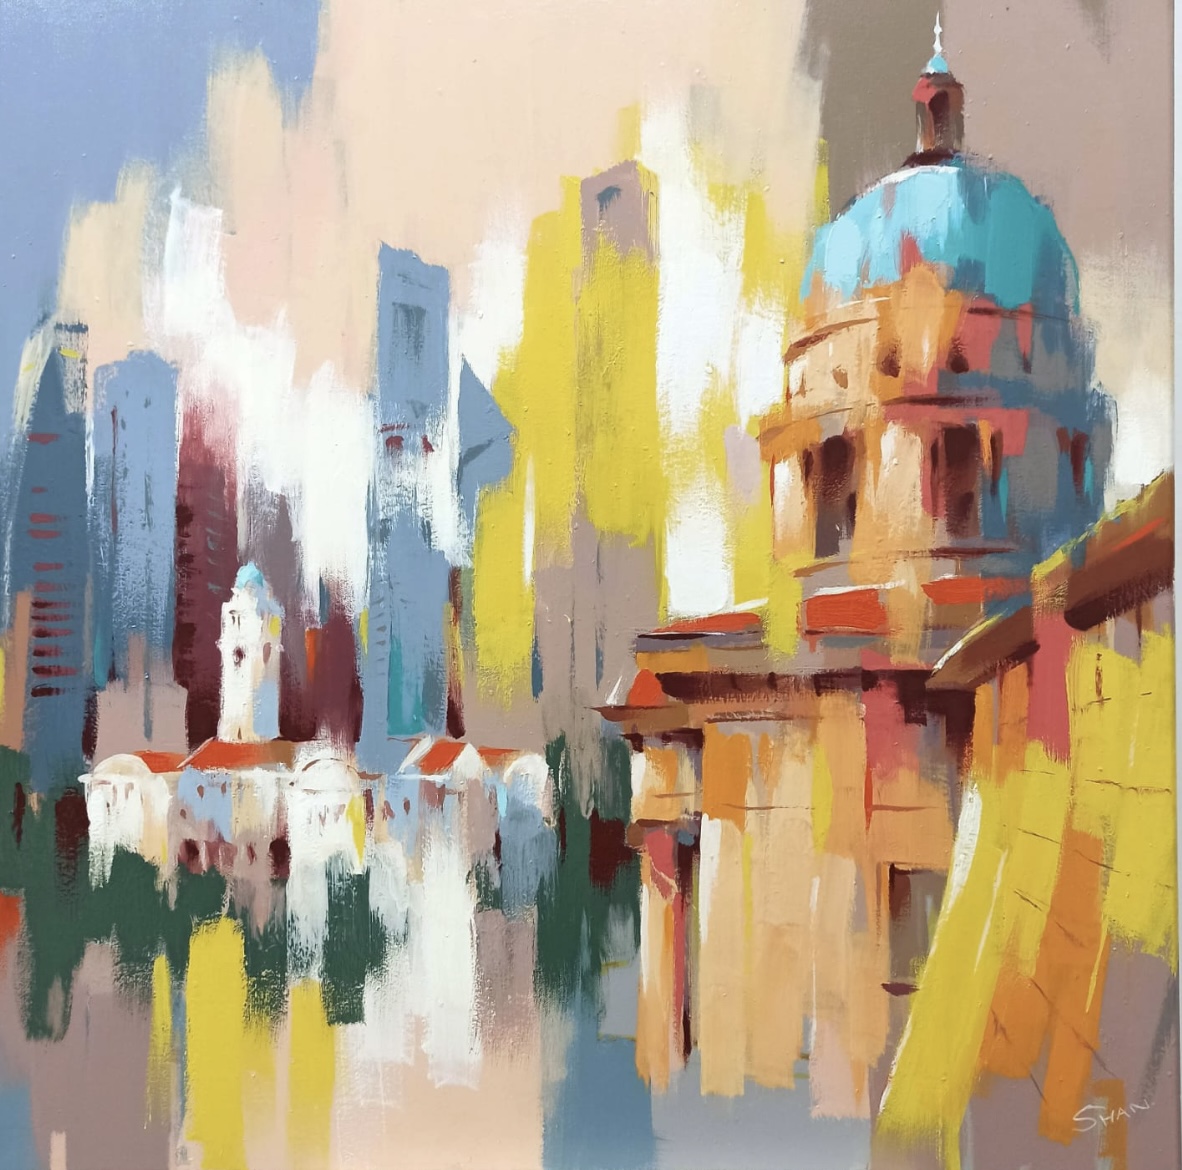 Painting, Studio Fine Art Gallery @ Affordable Art Fair, Yap Wen Shan, National gallery cityscape